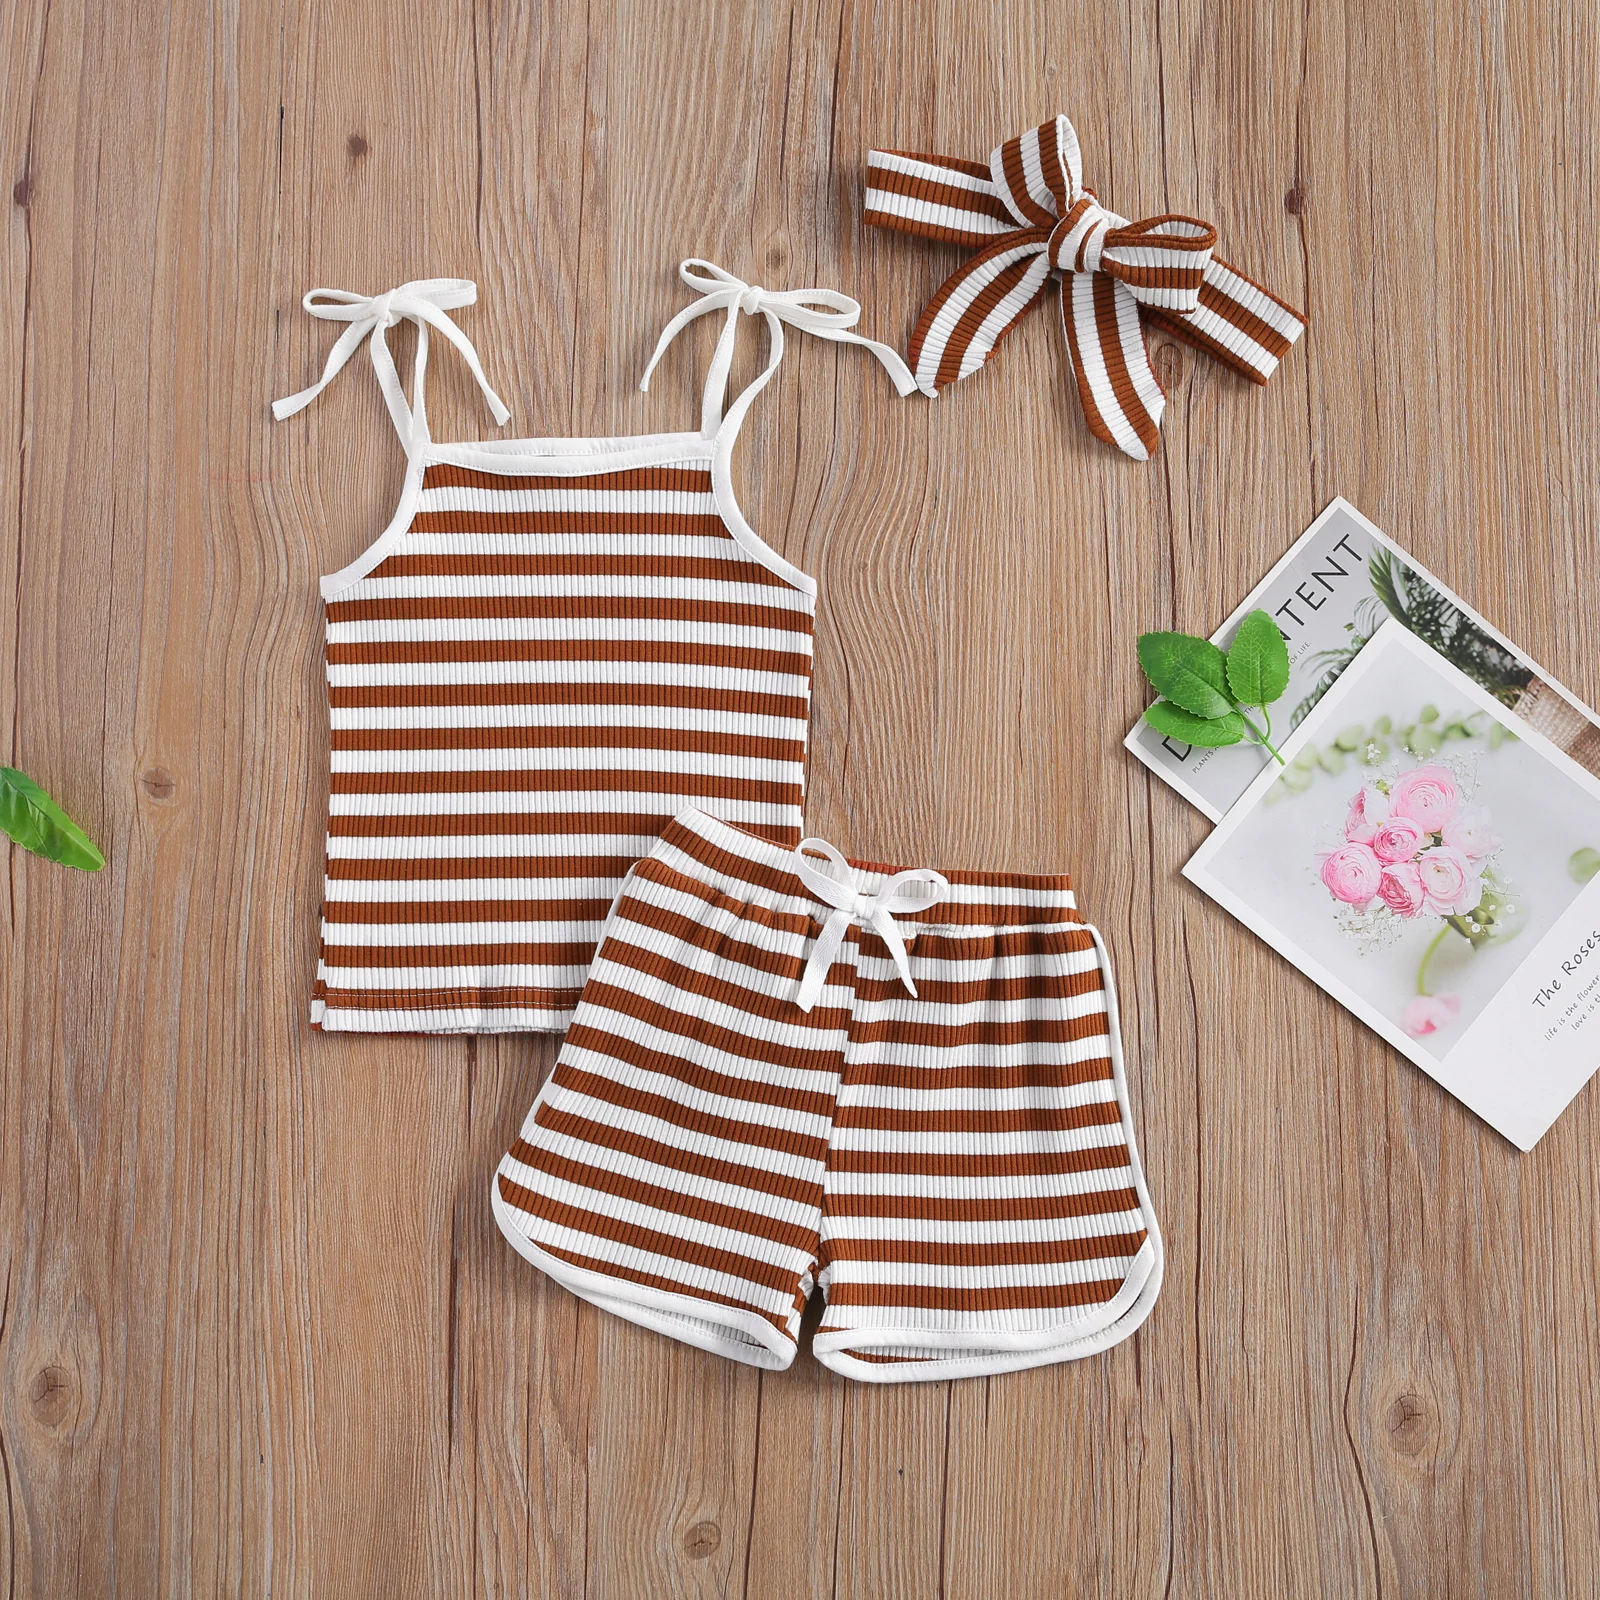 0-24M Newborn Baby Girls Boys 3Pcs Clothes Sets Striped Knitted Sleeveless Summer Sling Tops with Elastic Short and headband baby shirt clothing set Baby Clothing Set